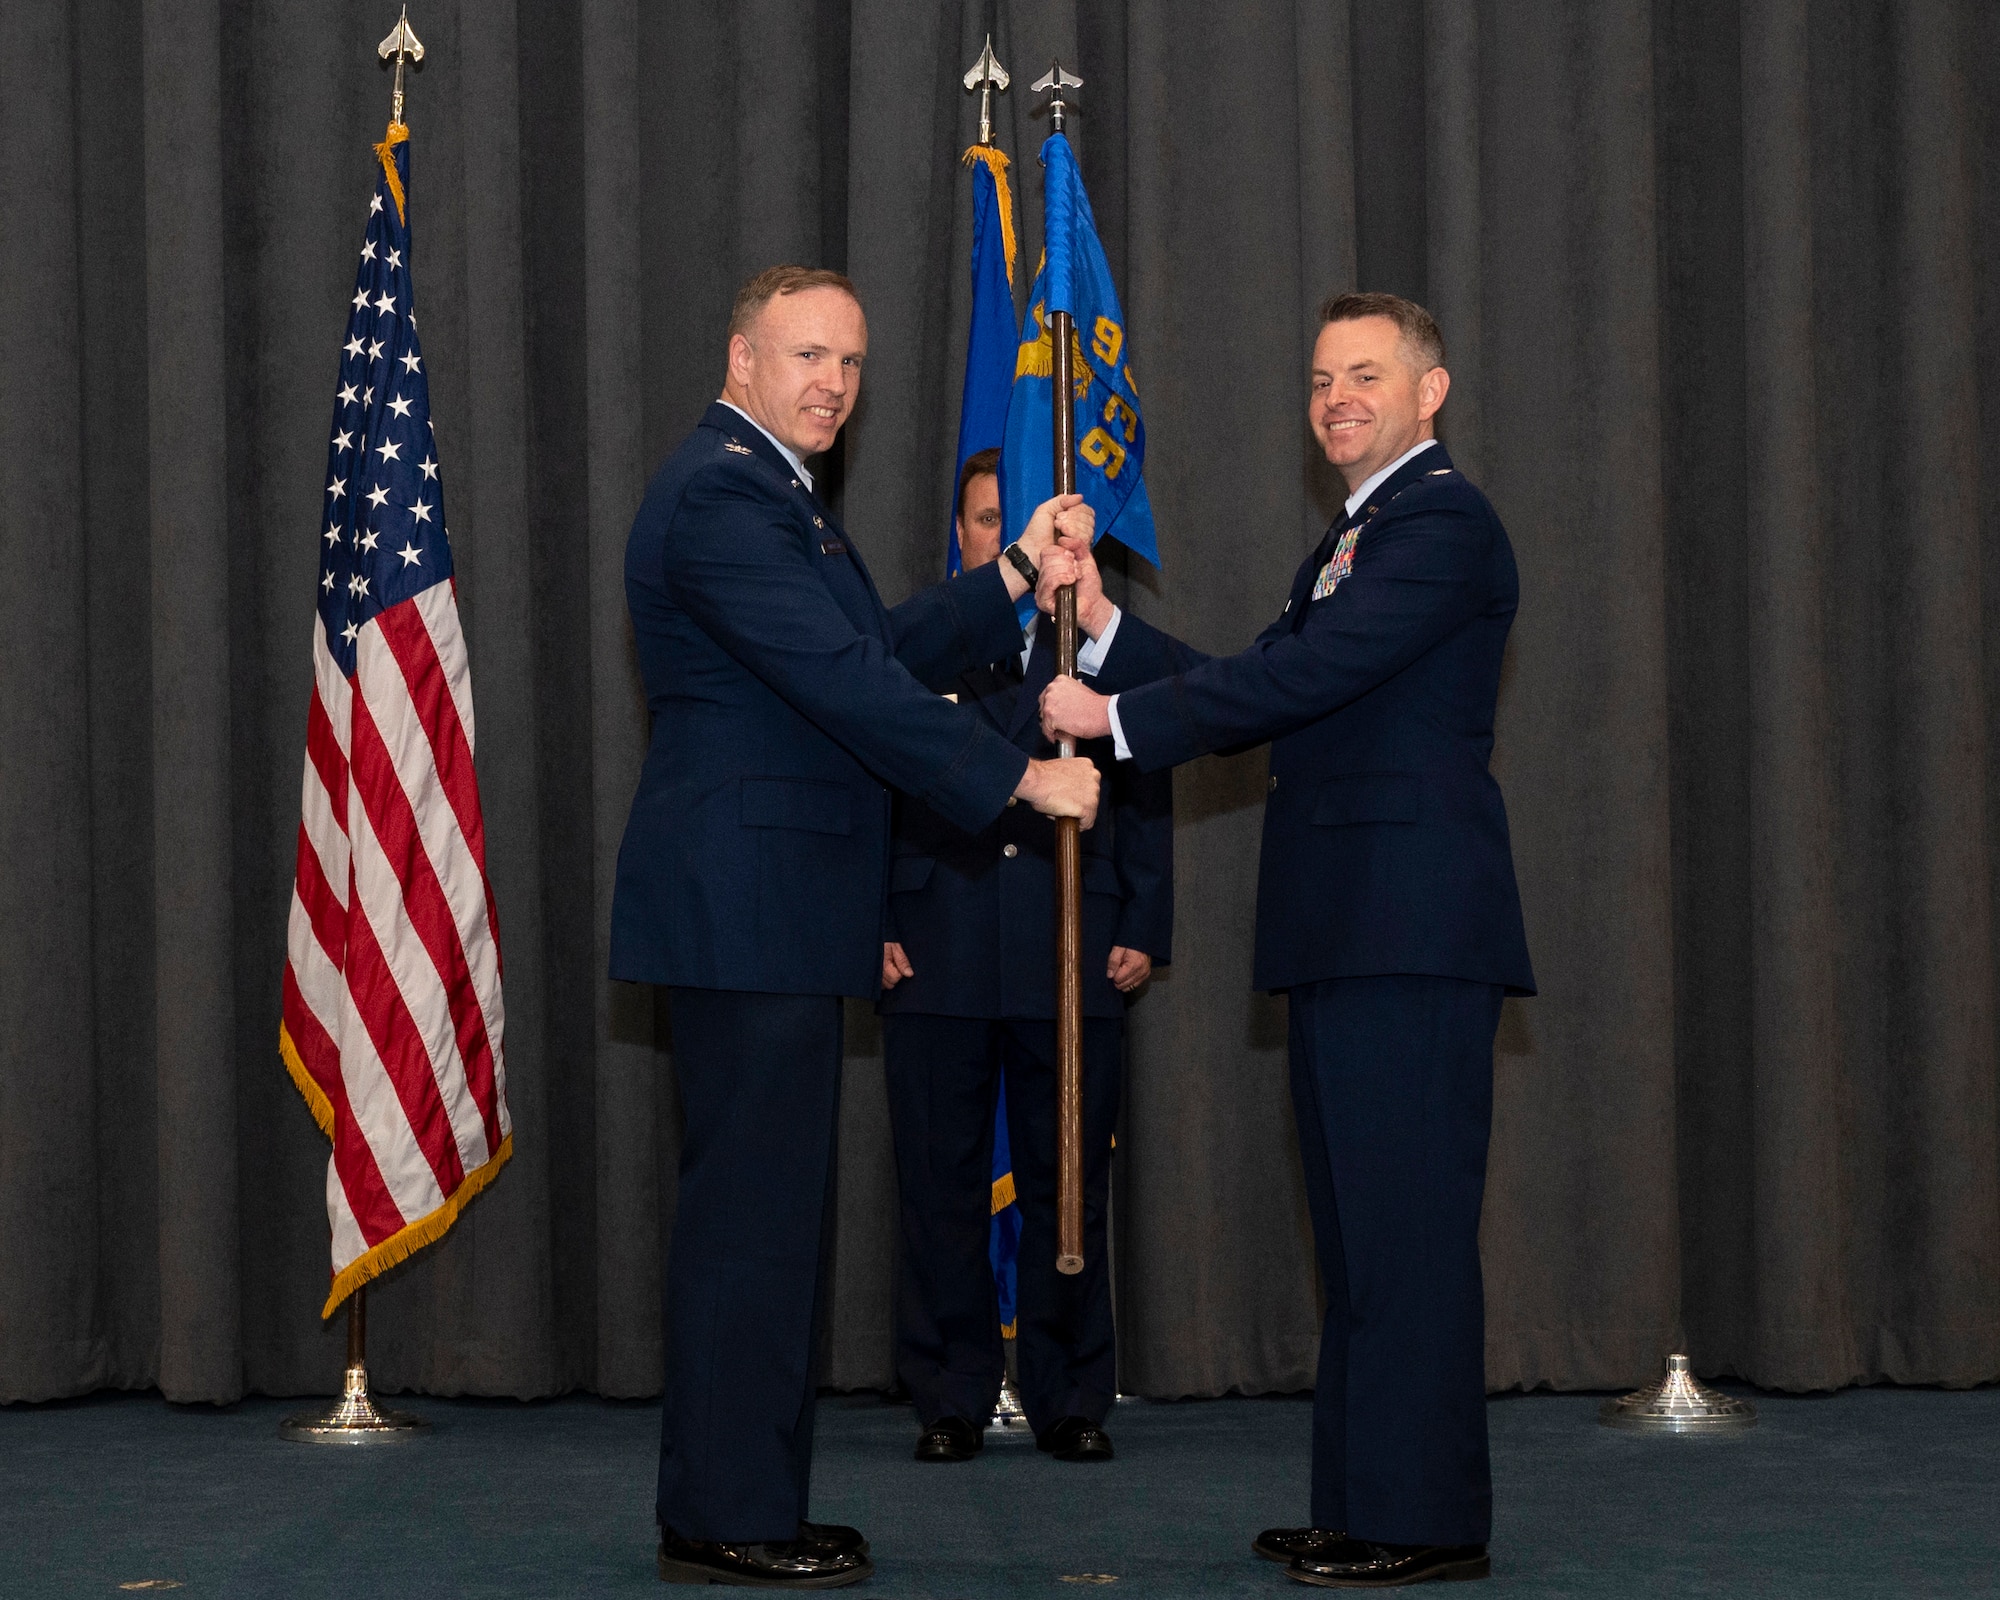 Two Airman hold a flag